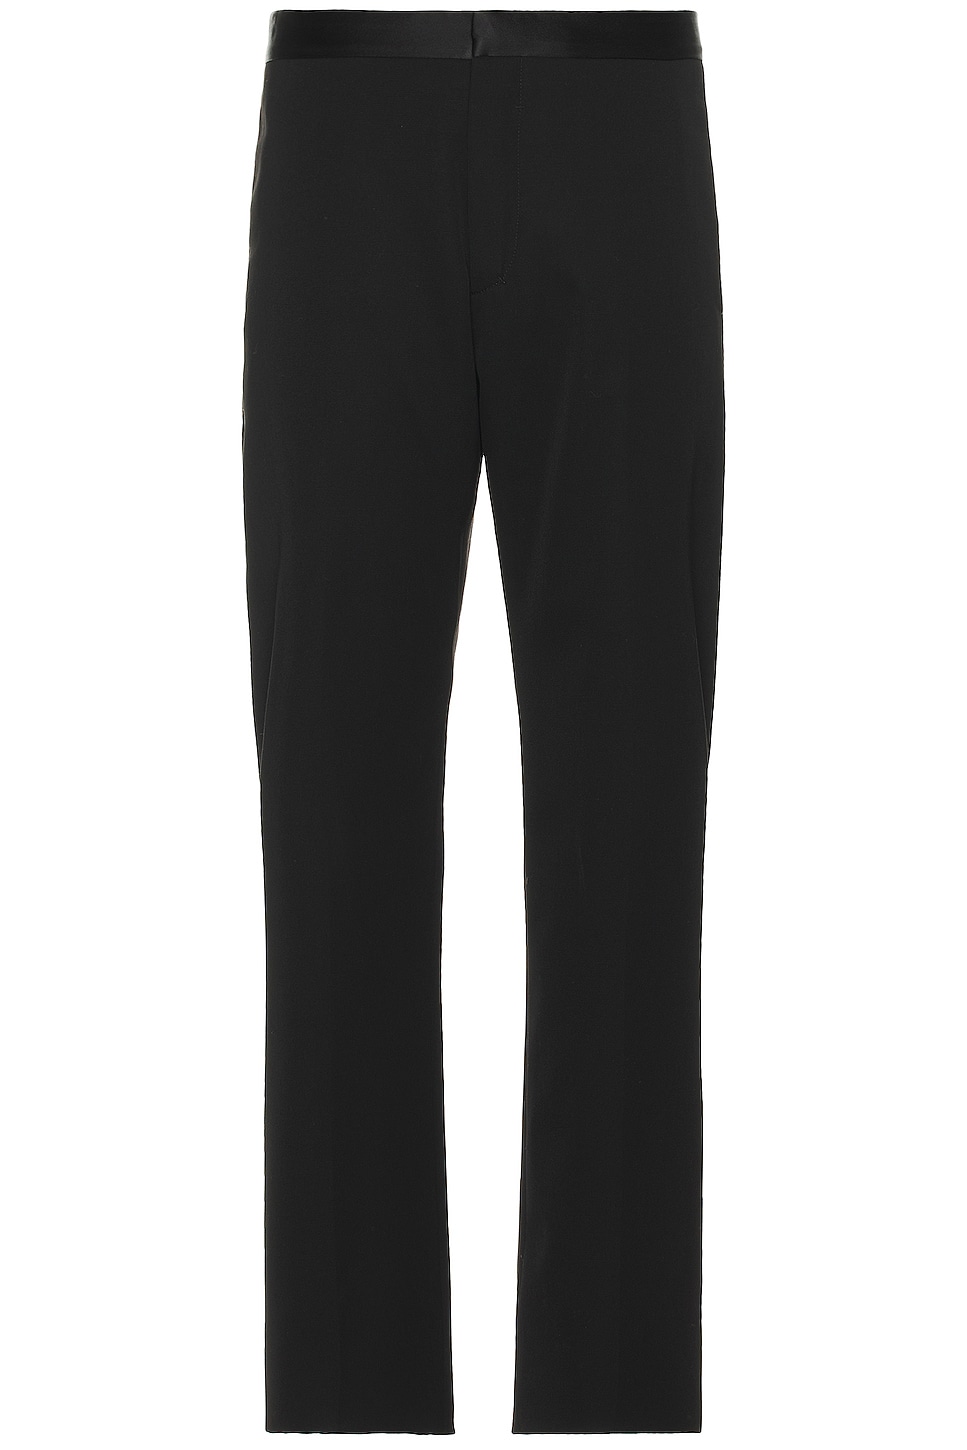 Image 1 of Givenchy Couture Trousers in Black